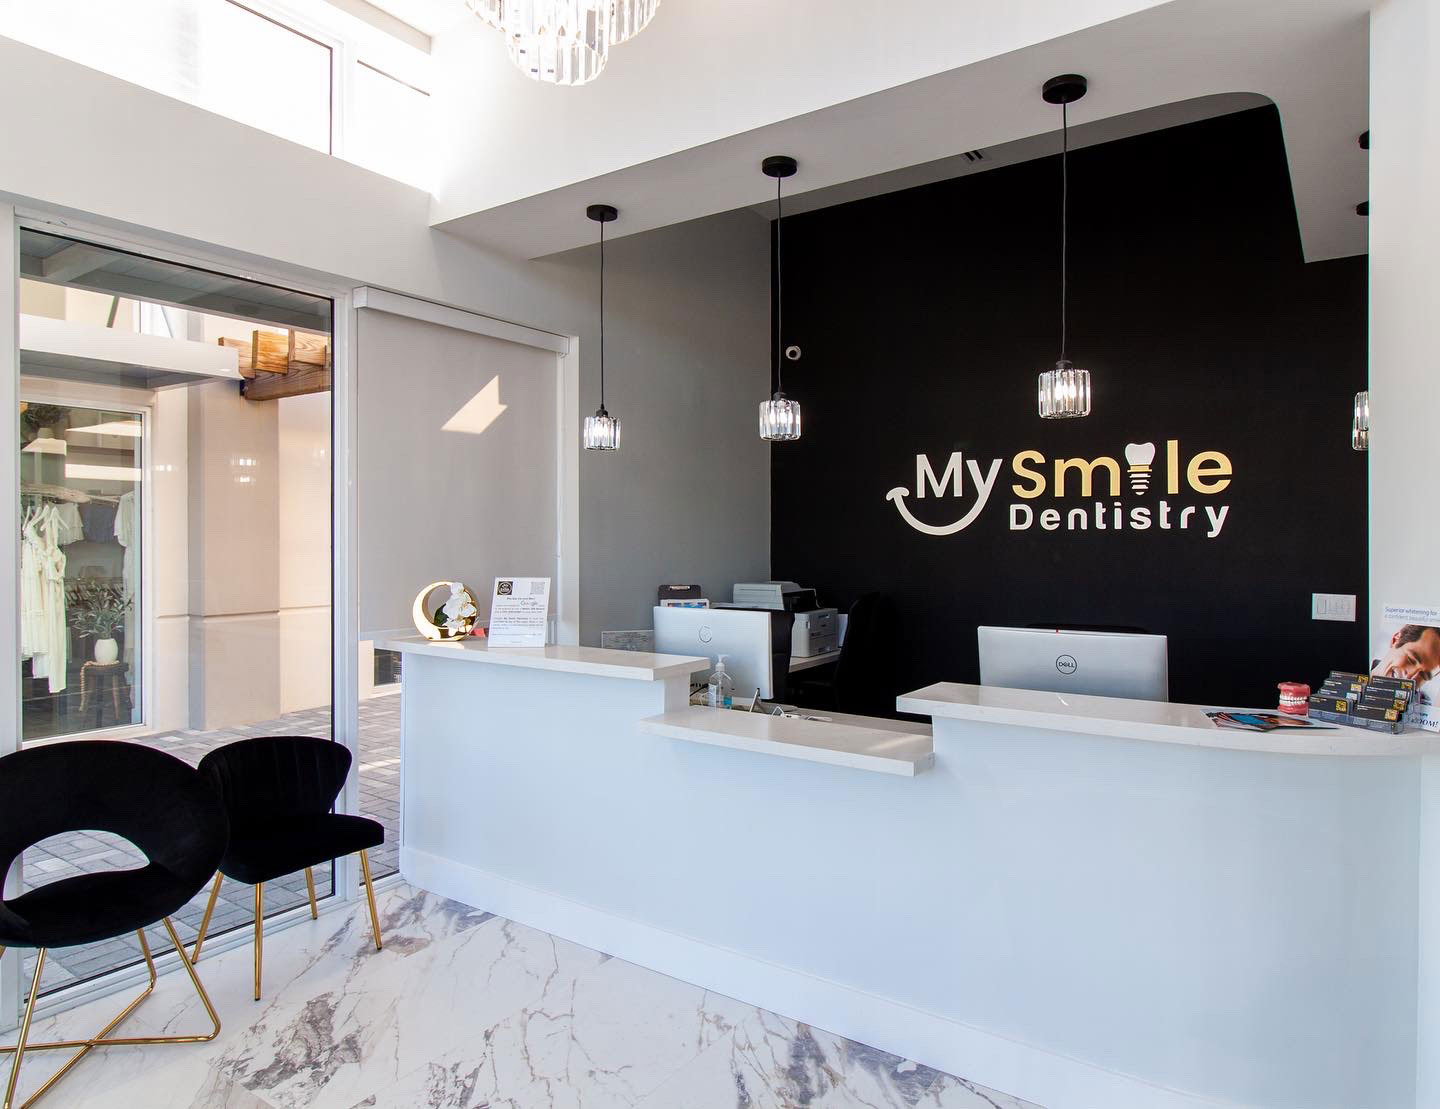 My Smile Dentistry | Sealants, 3D Guided Implant Surgery and Root Canals